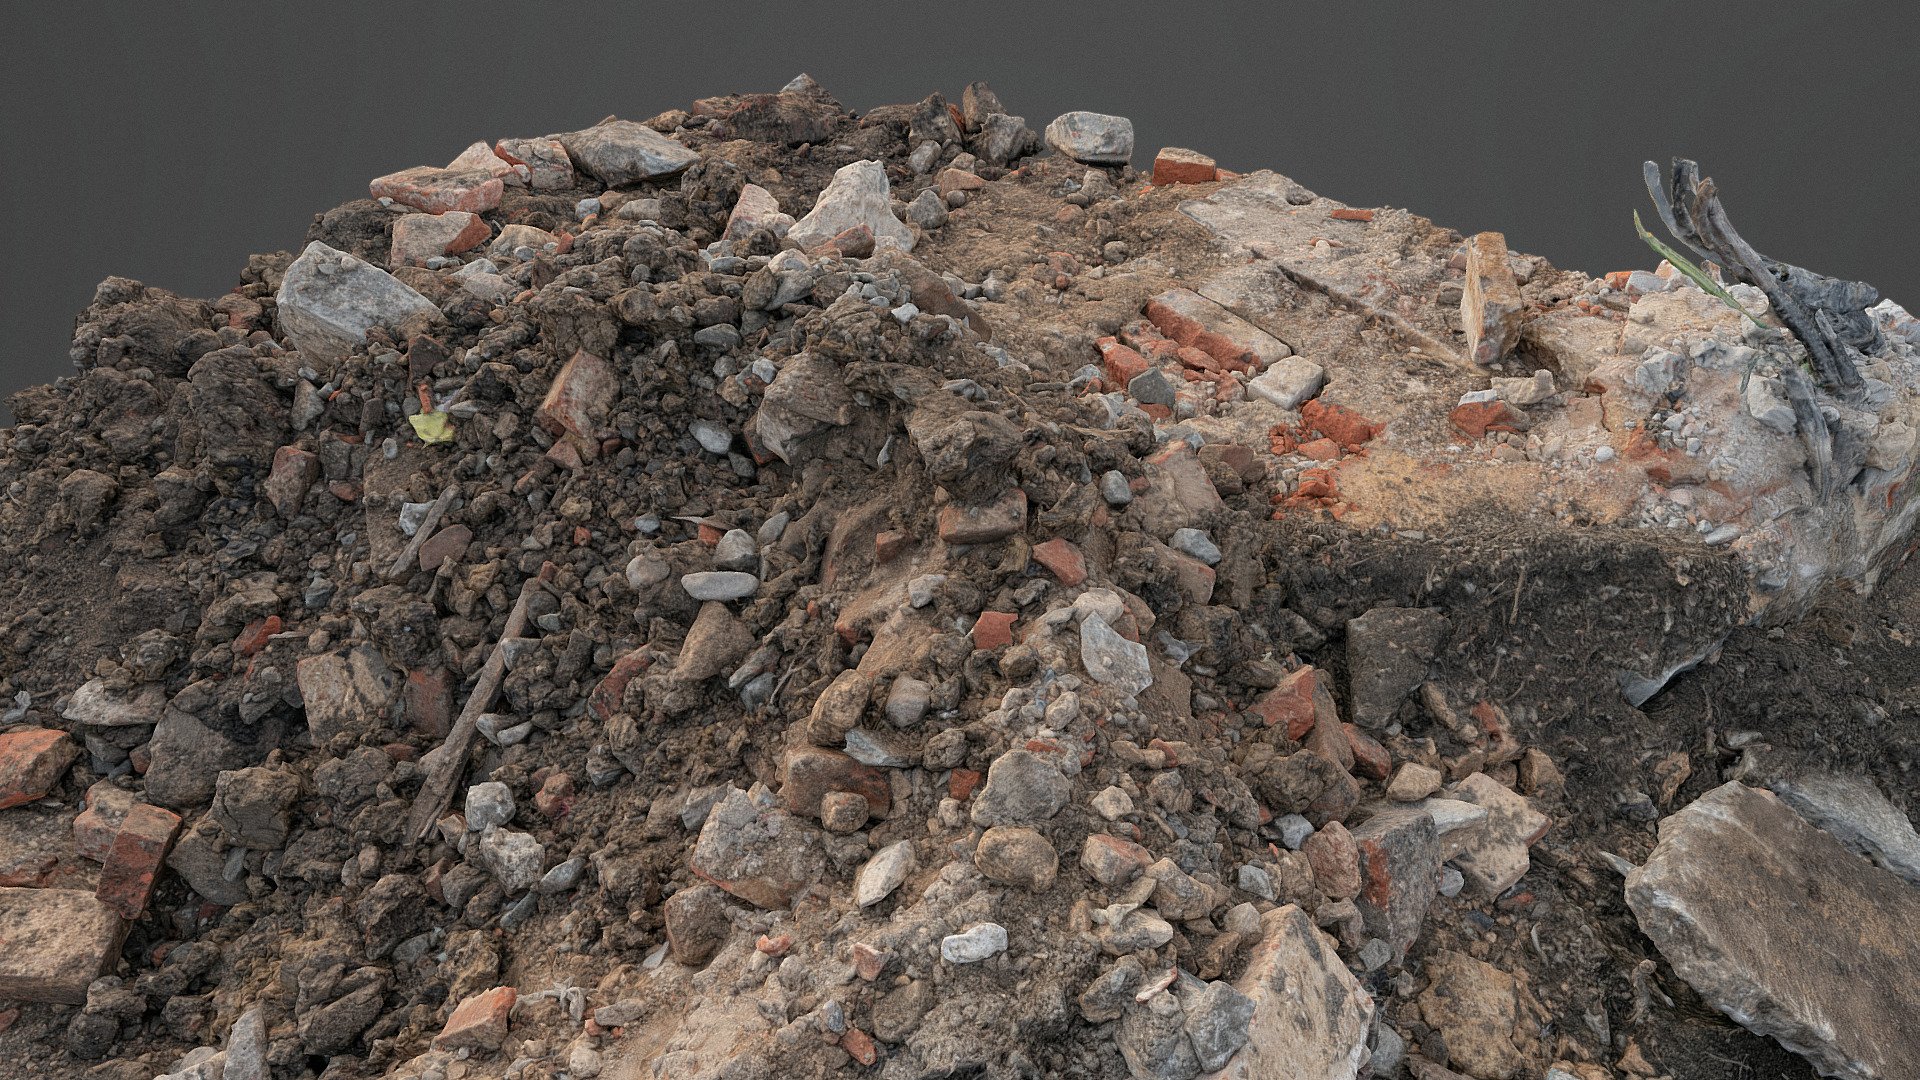 Destroyed concrete construction debris demolition ruin house wall junk pieces construction chunks, bricks and stones and some remains of cables

Photogrammetry scan 240x24MP, 3x8K texture - Ruined construction debris with cables - Buy Royalty Free 3D model by axonite 3d model